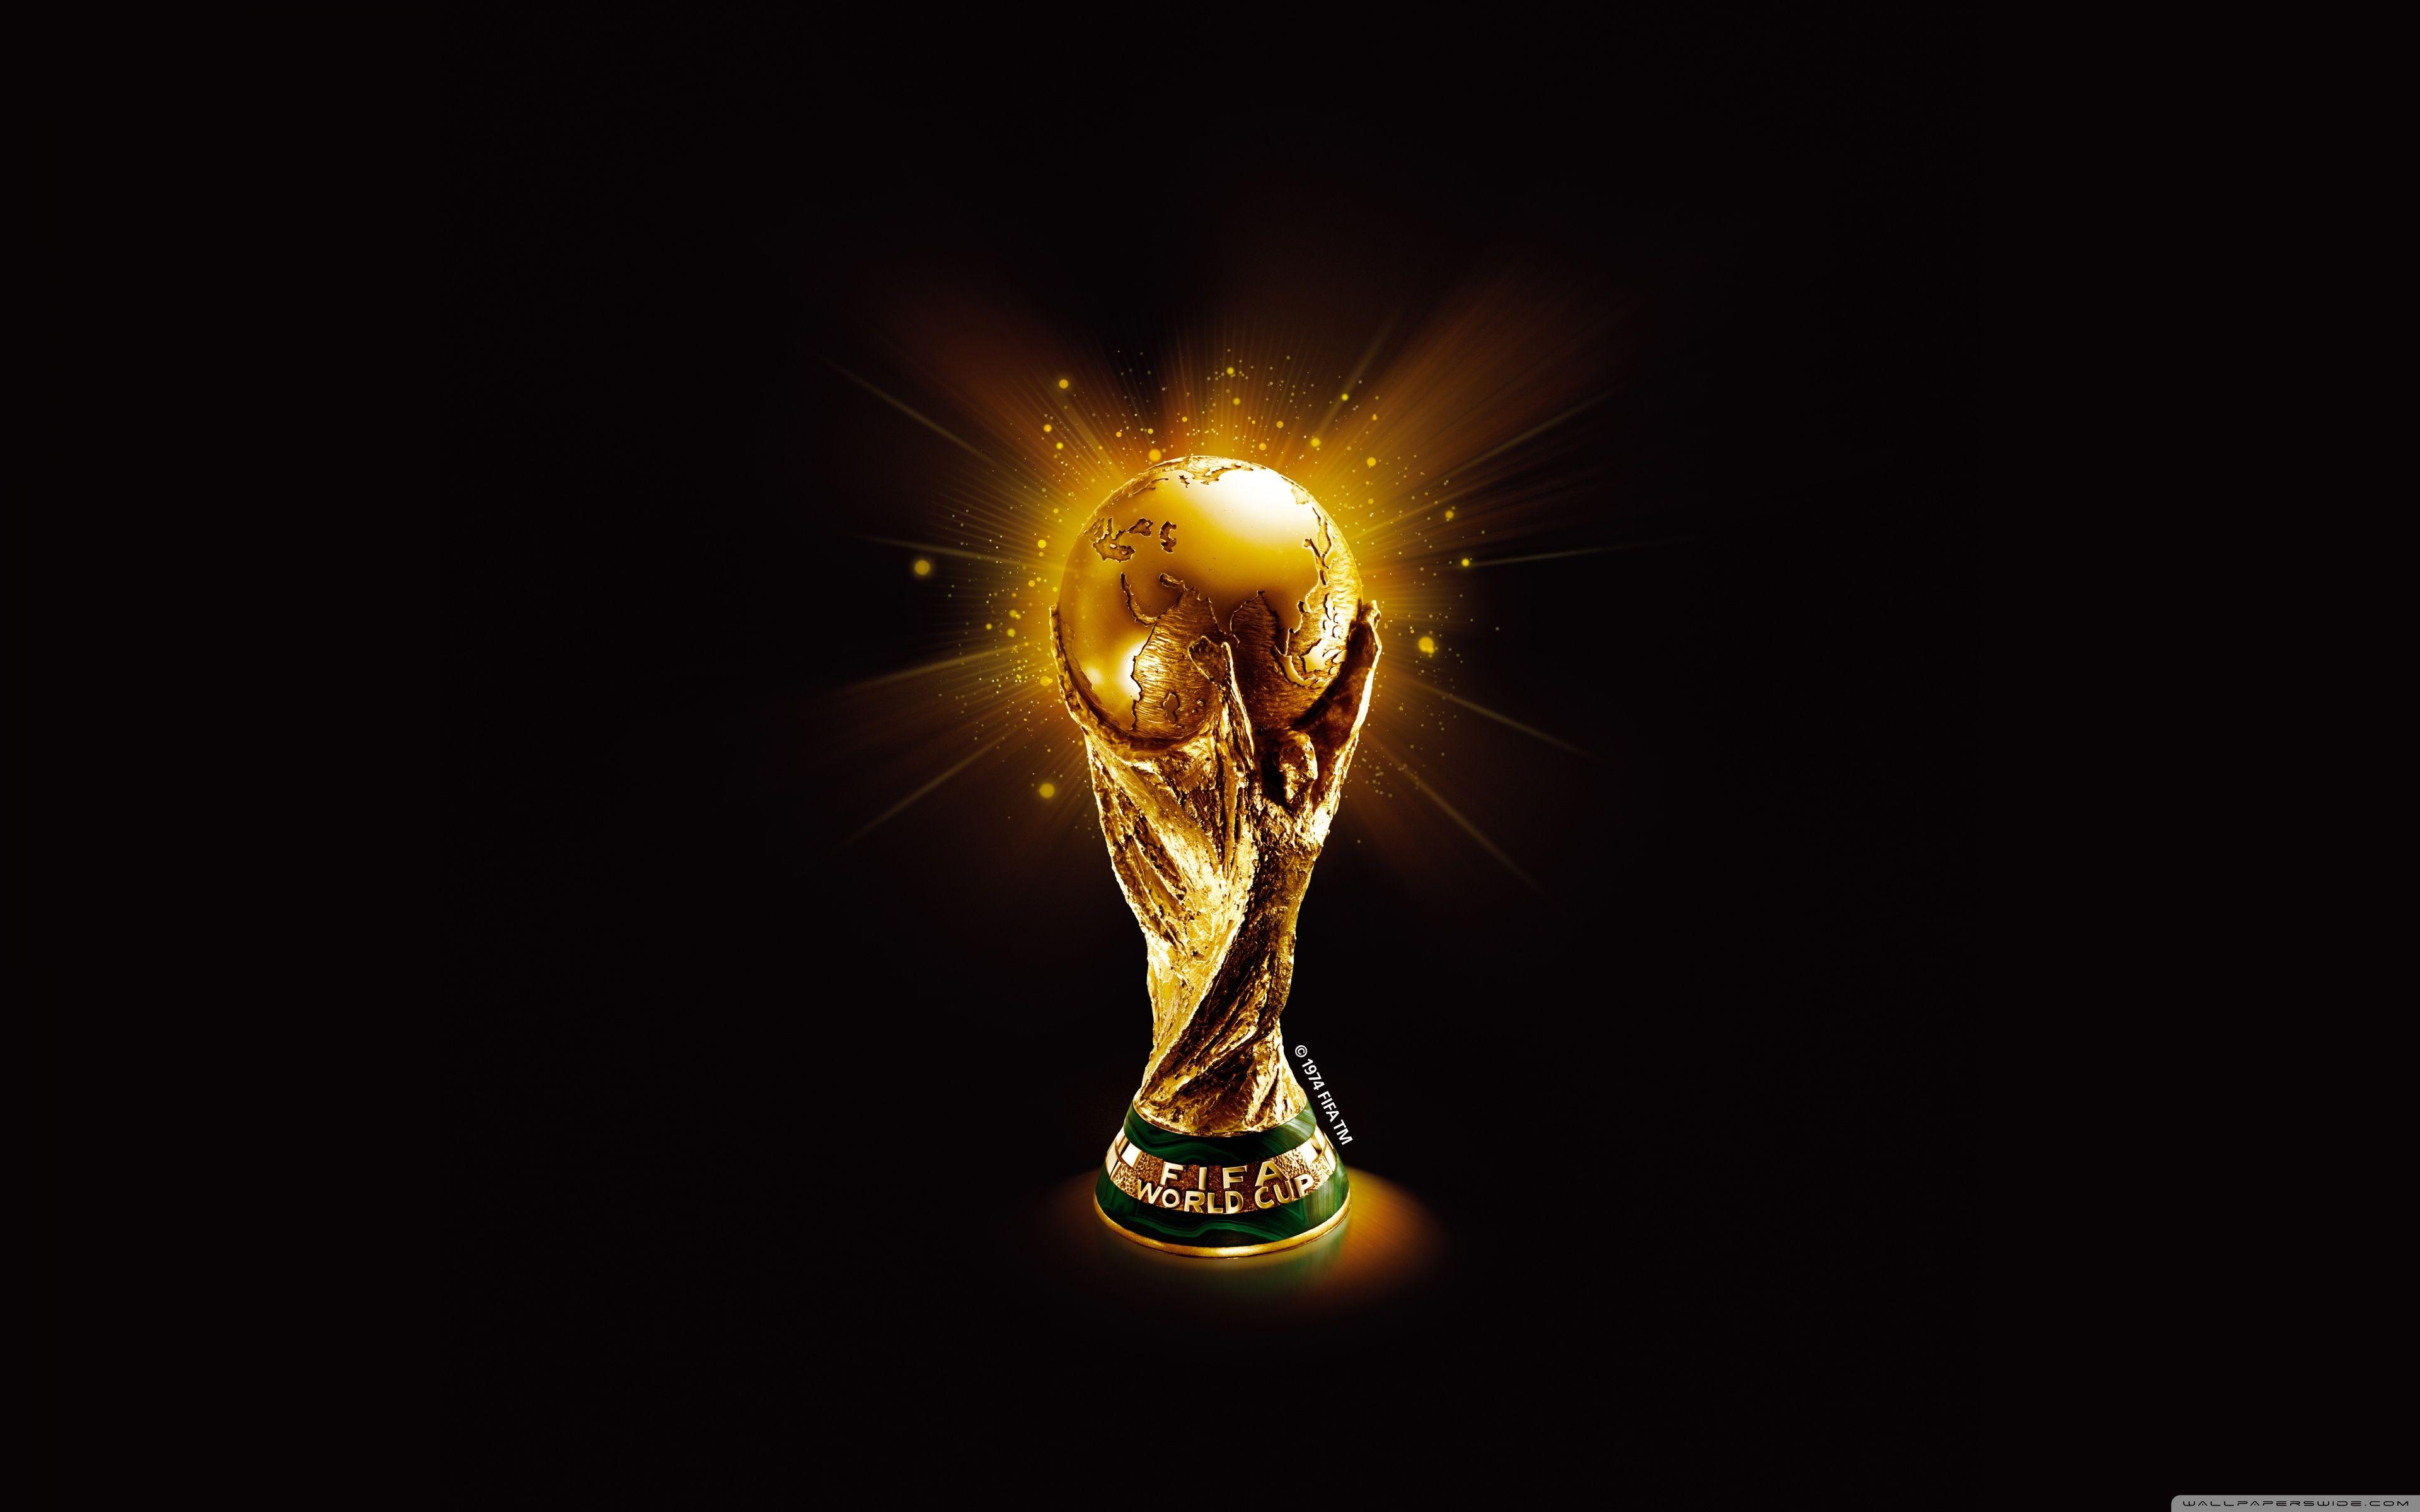 FIFA World Cup Wallpapers - Top Free FIFA World Cup Backgrounds